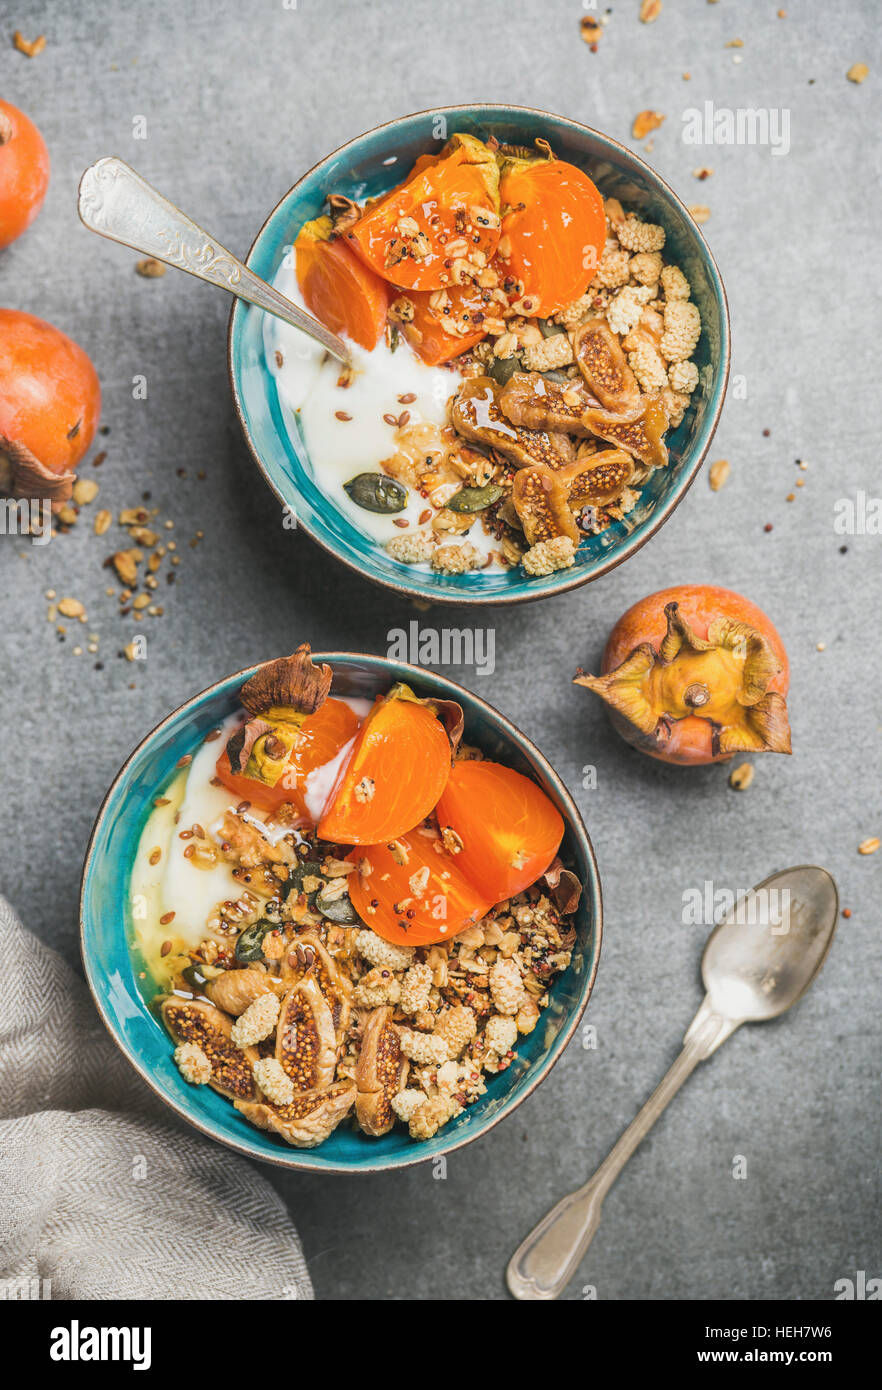 Healthy breakfast. Close-up of oatmeal, quinoa granola with yogurt, dried fruit, seeds, honey, fresh persimmon in blue ceramic bowls over grey backgro Stock Photo